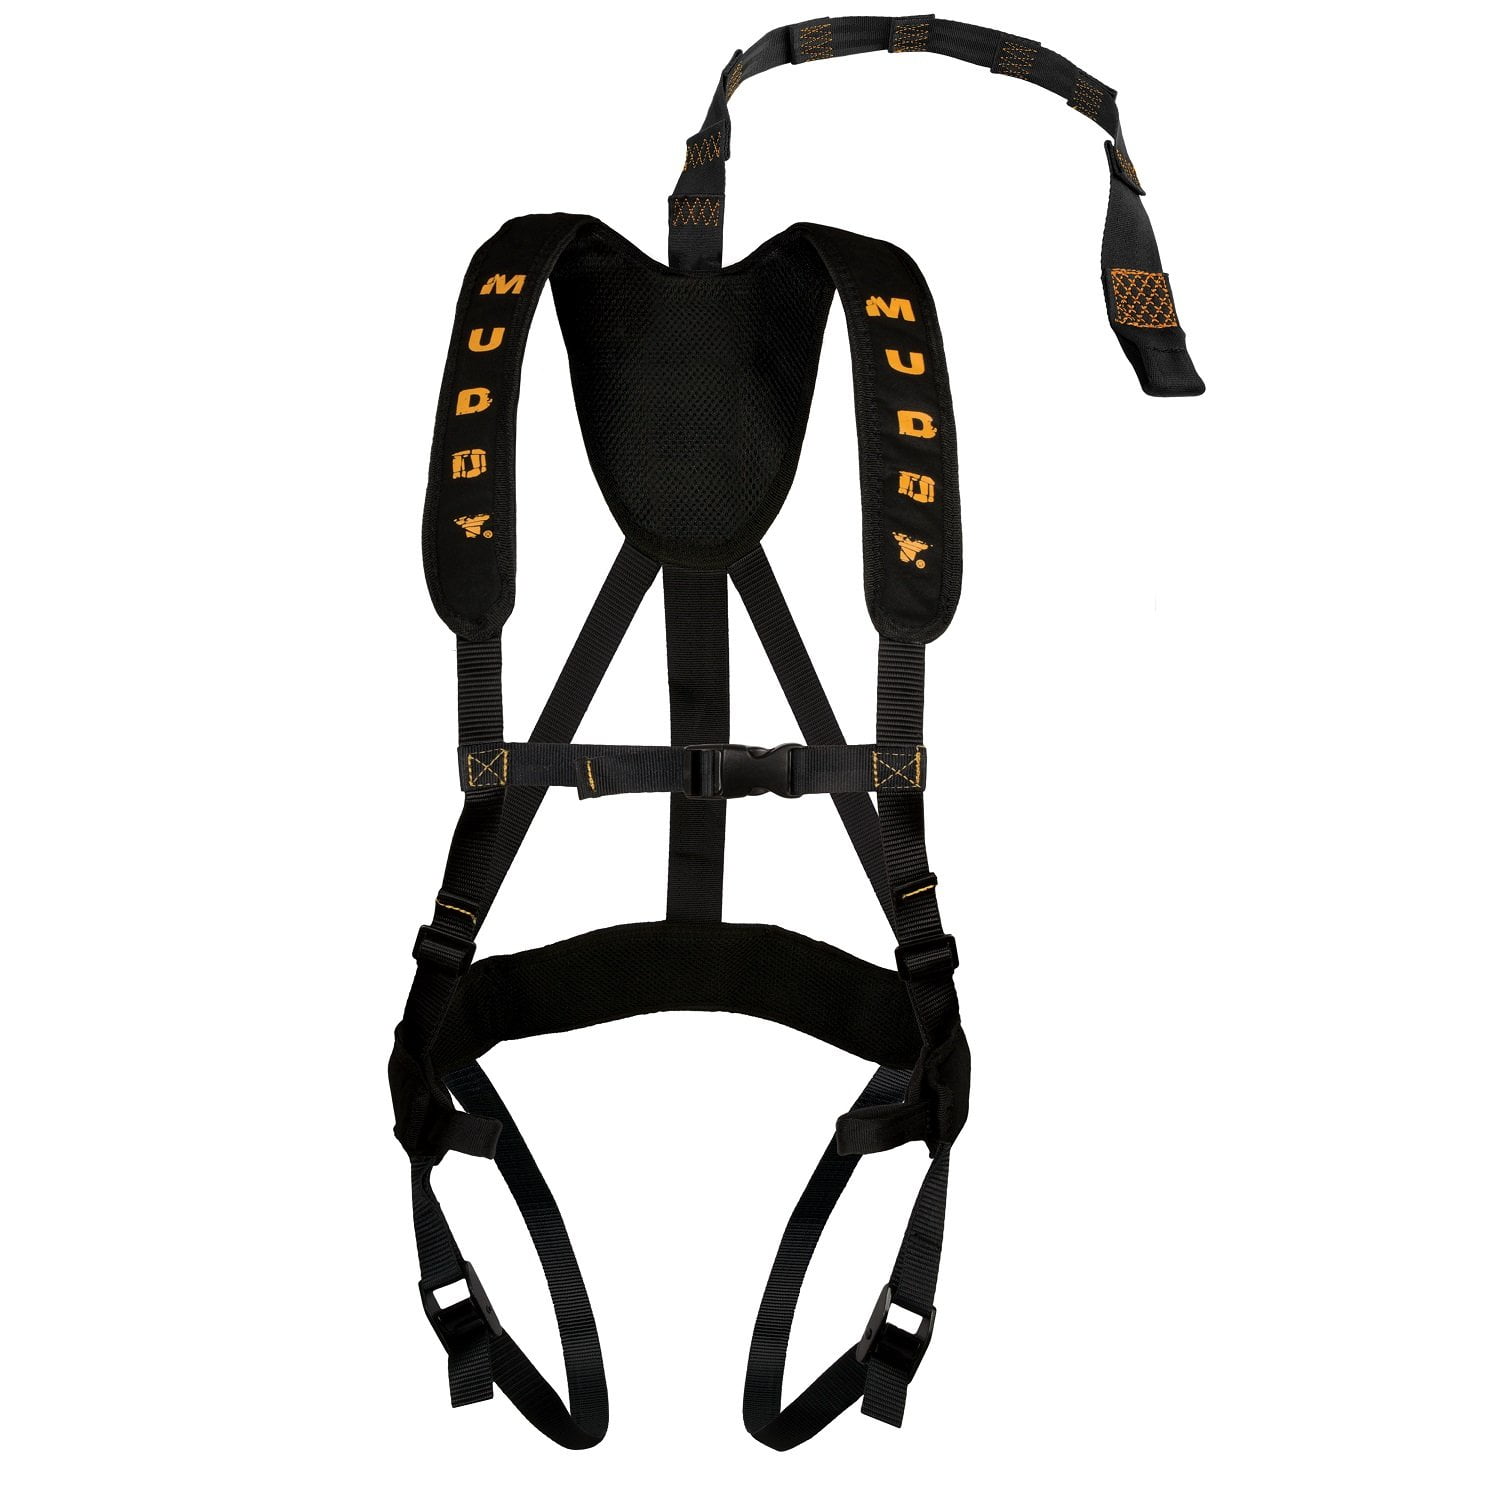 Muddy Outdoors Magnum Safety Harness